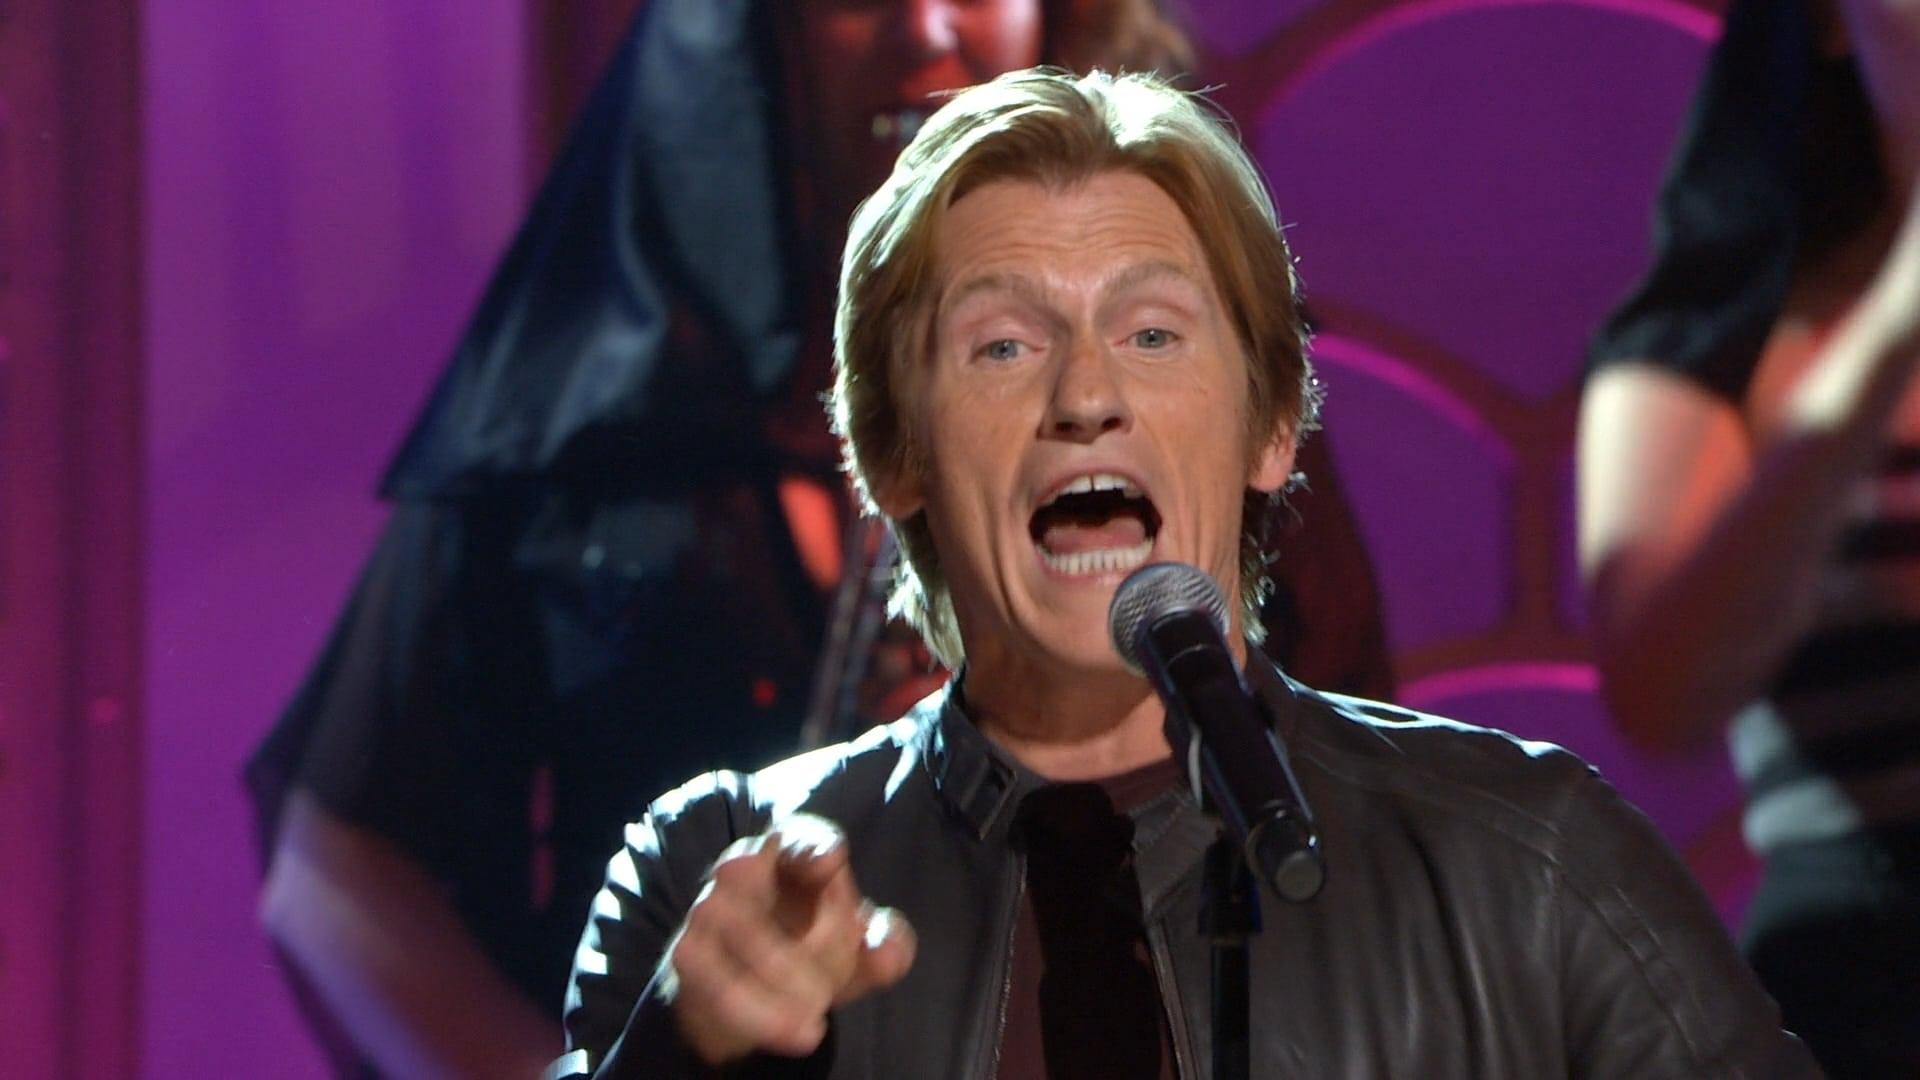 Denis Leary and Friends Present: Douchebags and Donuts backdrop